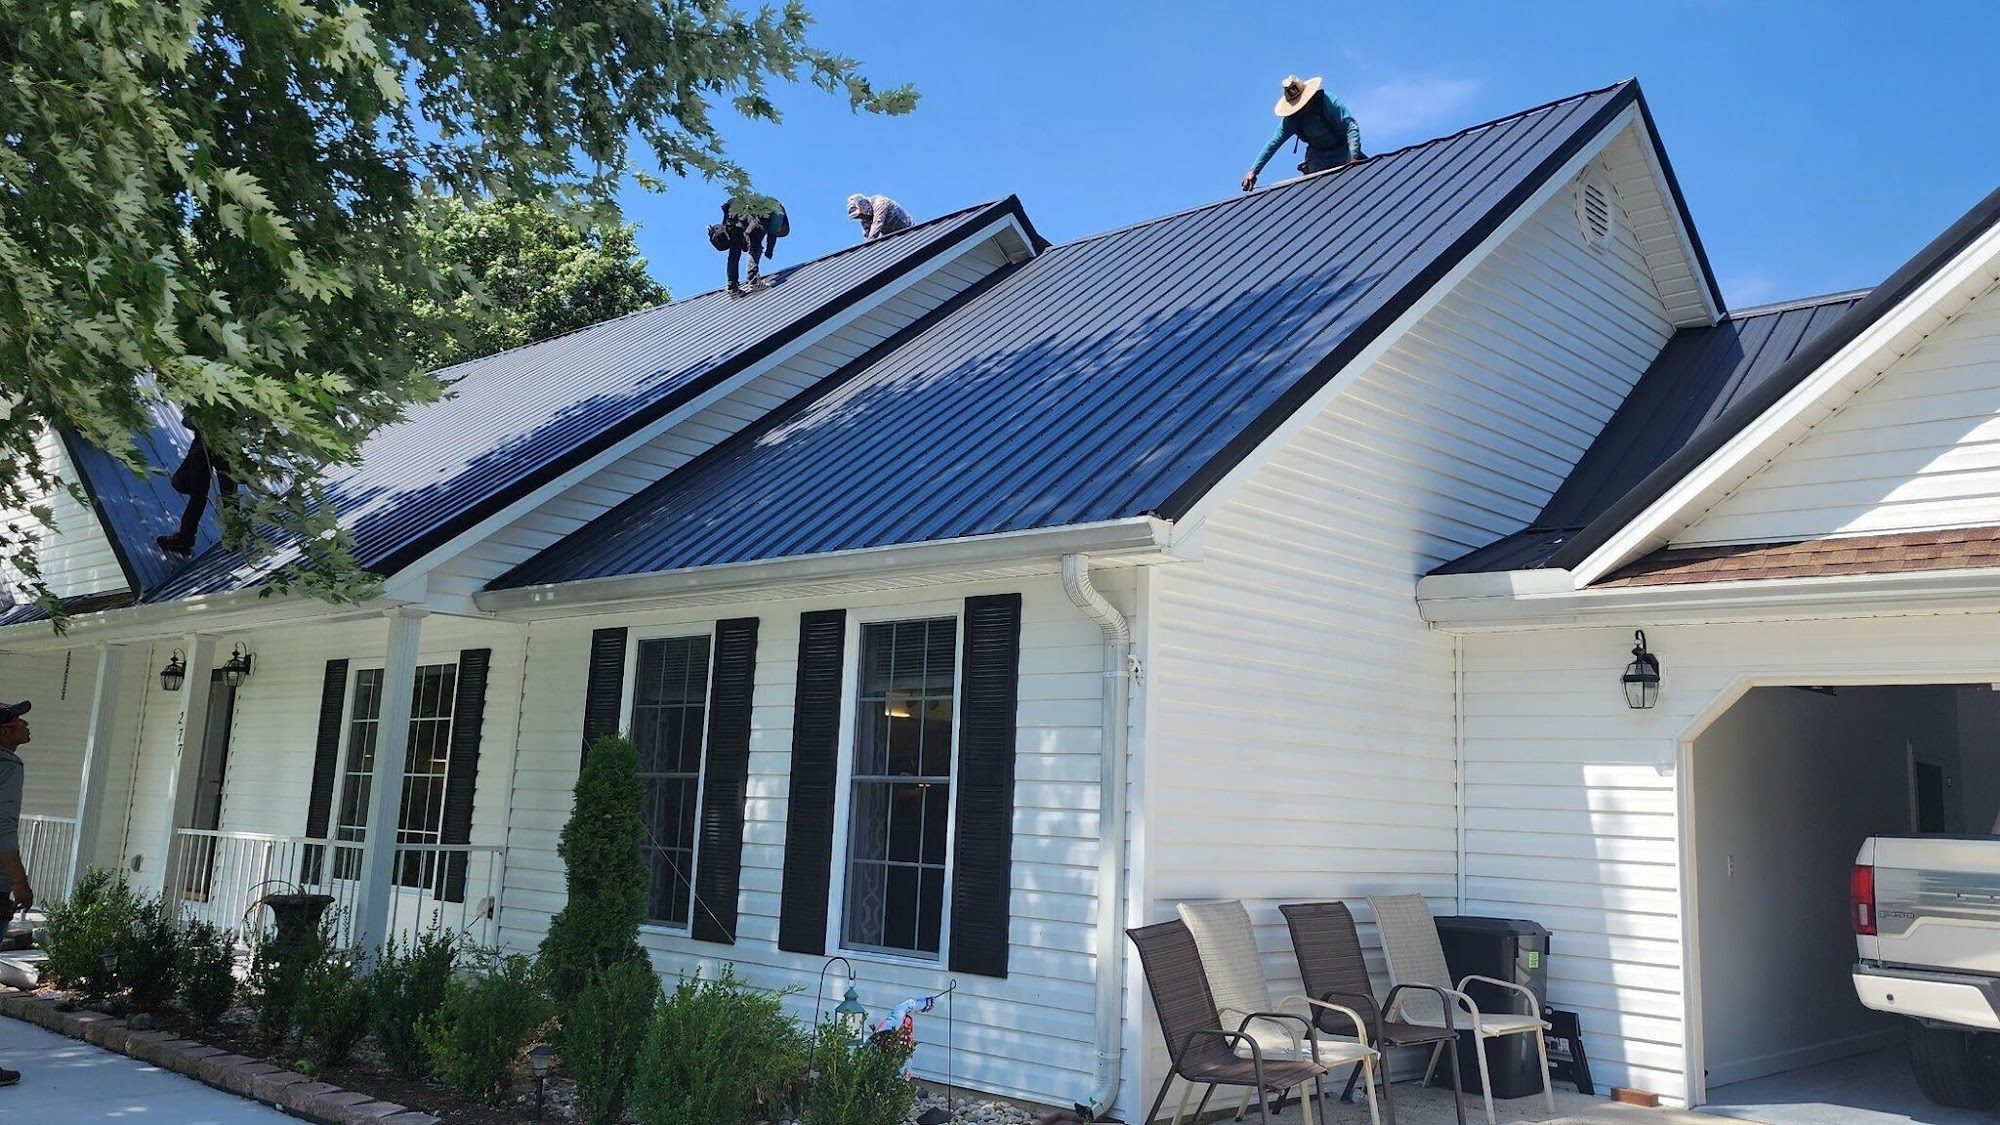 ProKing Roofing and Restoration